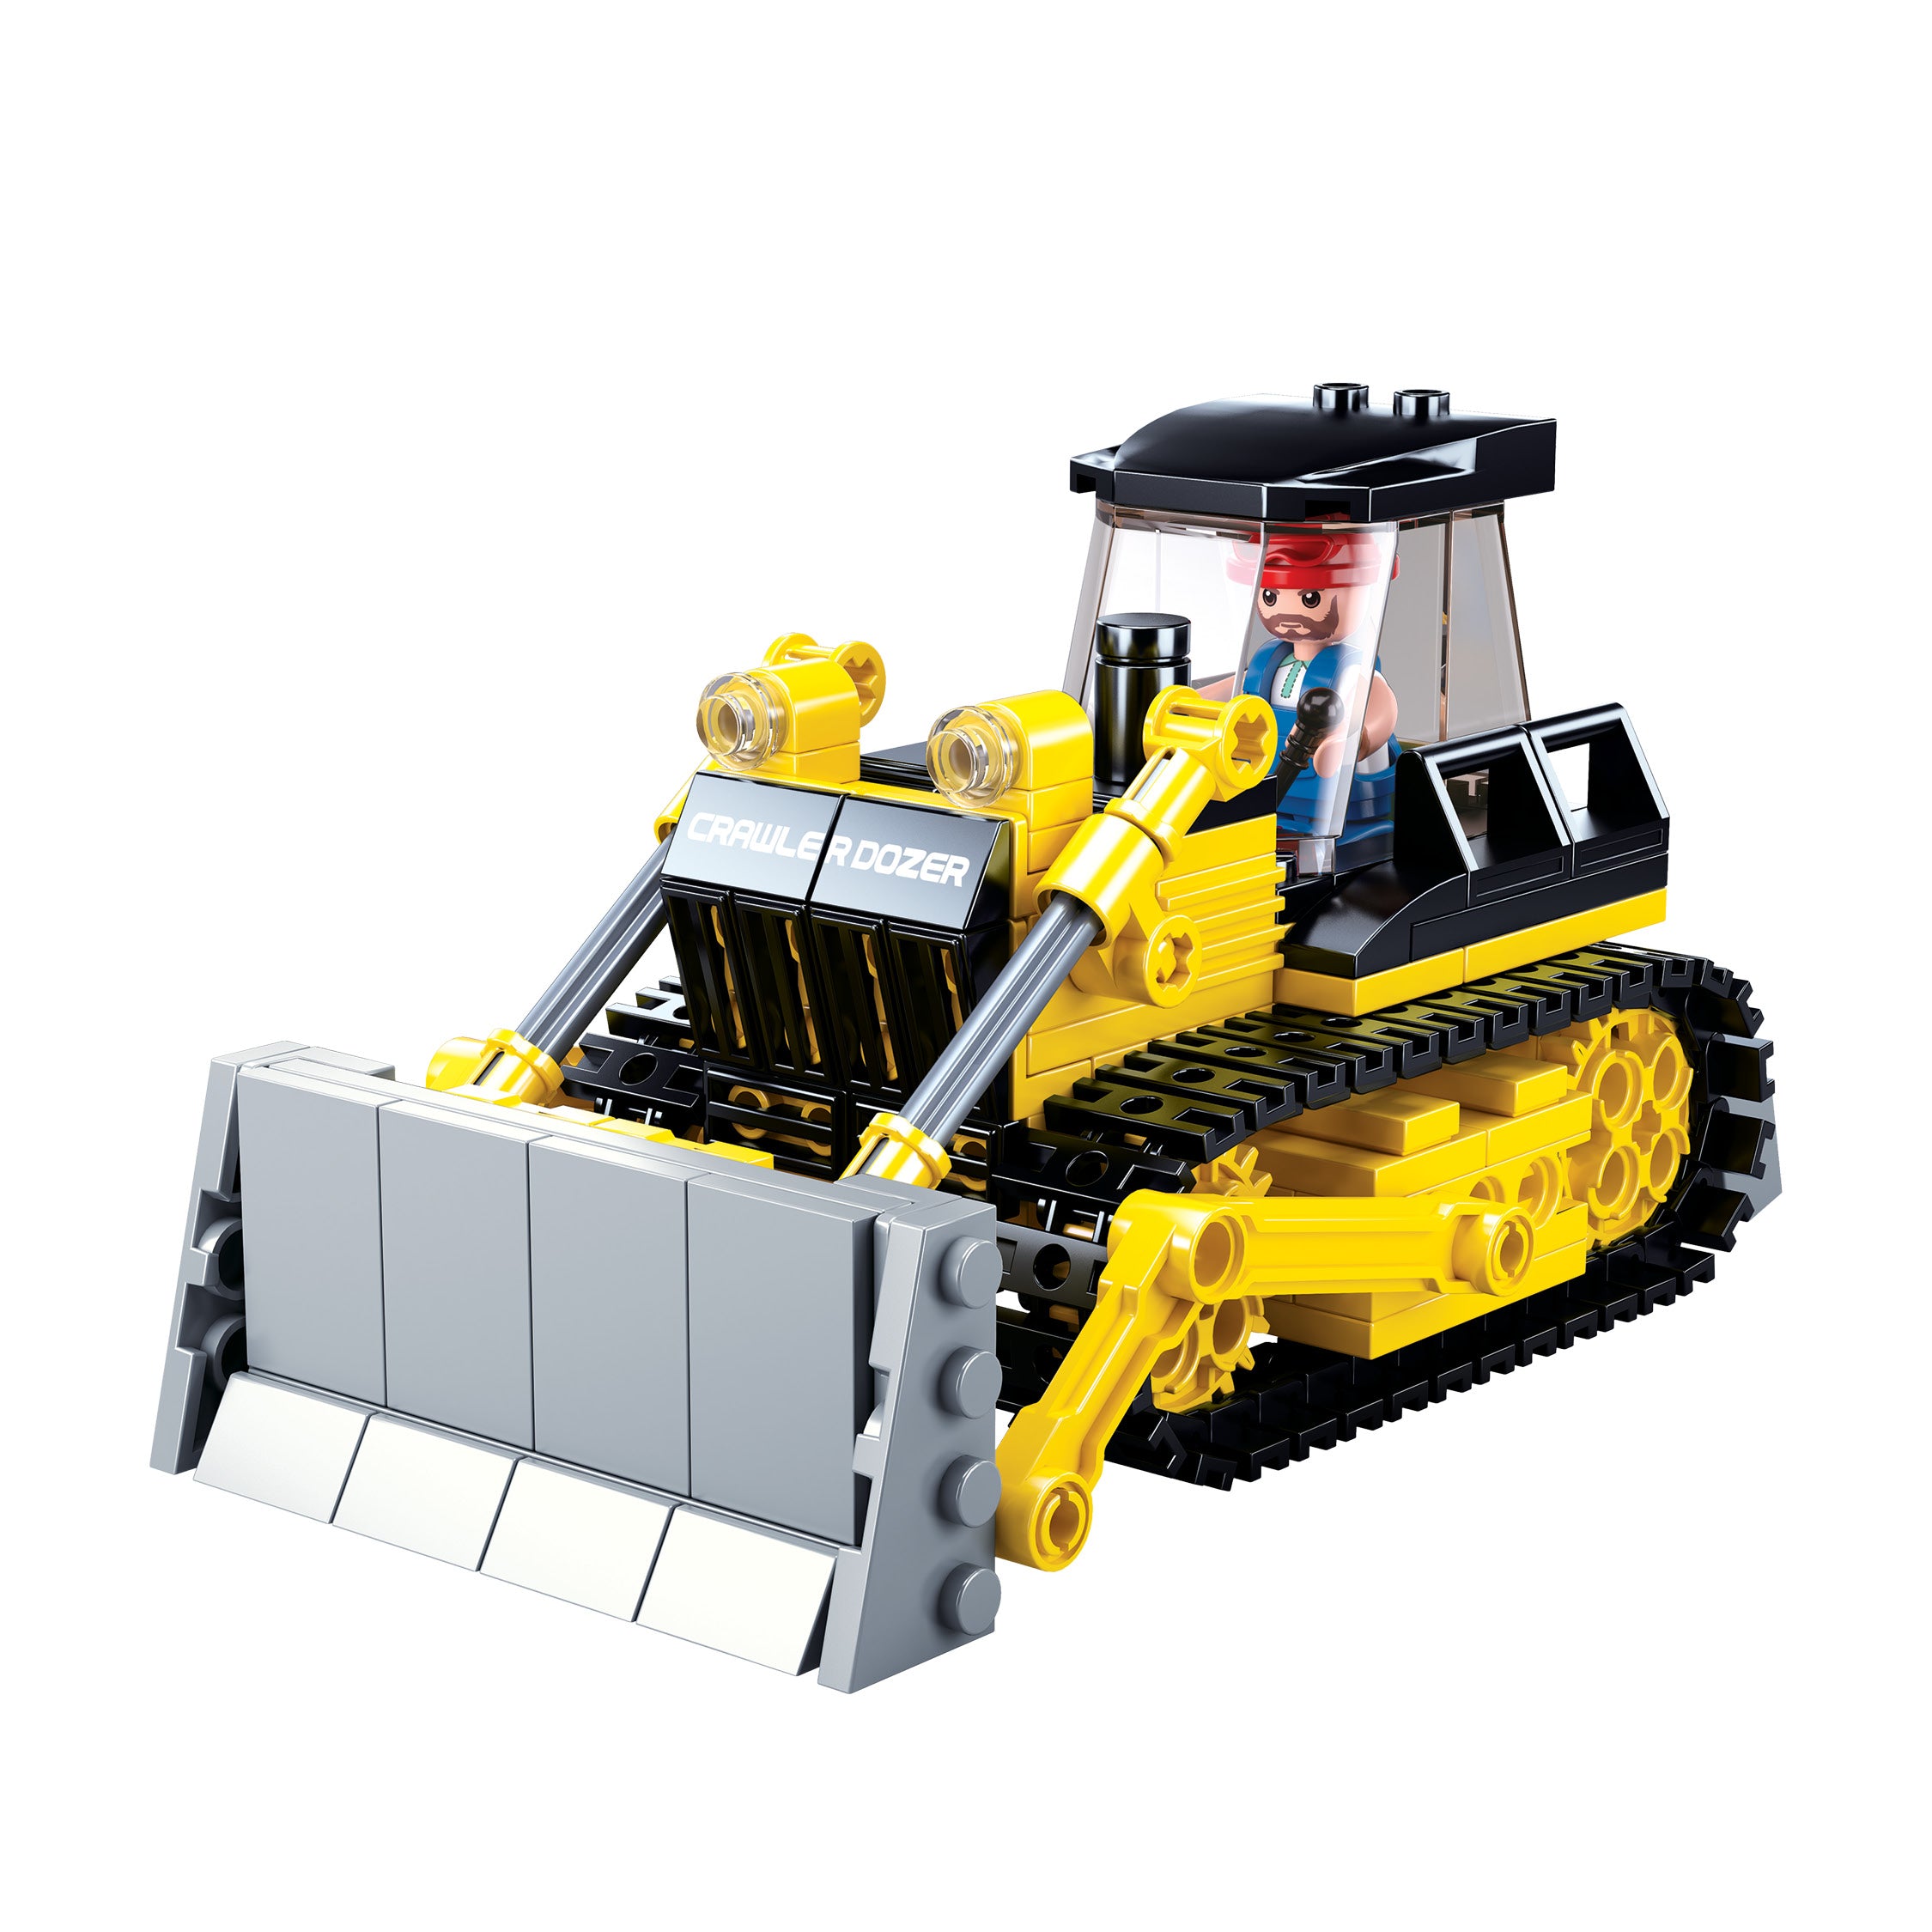 Sluban® Bulldozer (M38-B0802) (231 Pieces) Building Blocks Kit For Boys Aged 8 Years And Above Creative Construction Set Educational Stem Toy, Ideal For Gifting Birthday Gift Return Gift, Blocks Compatible With Other Leading Brands, Bis Certified.